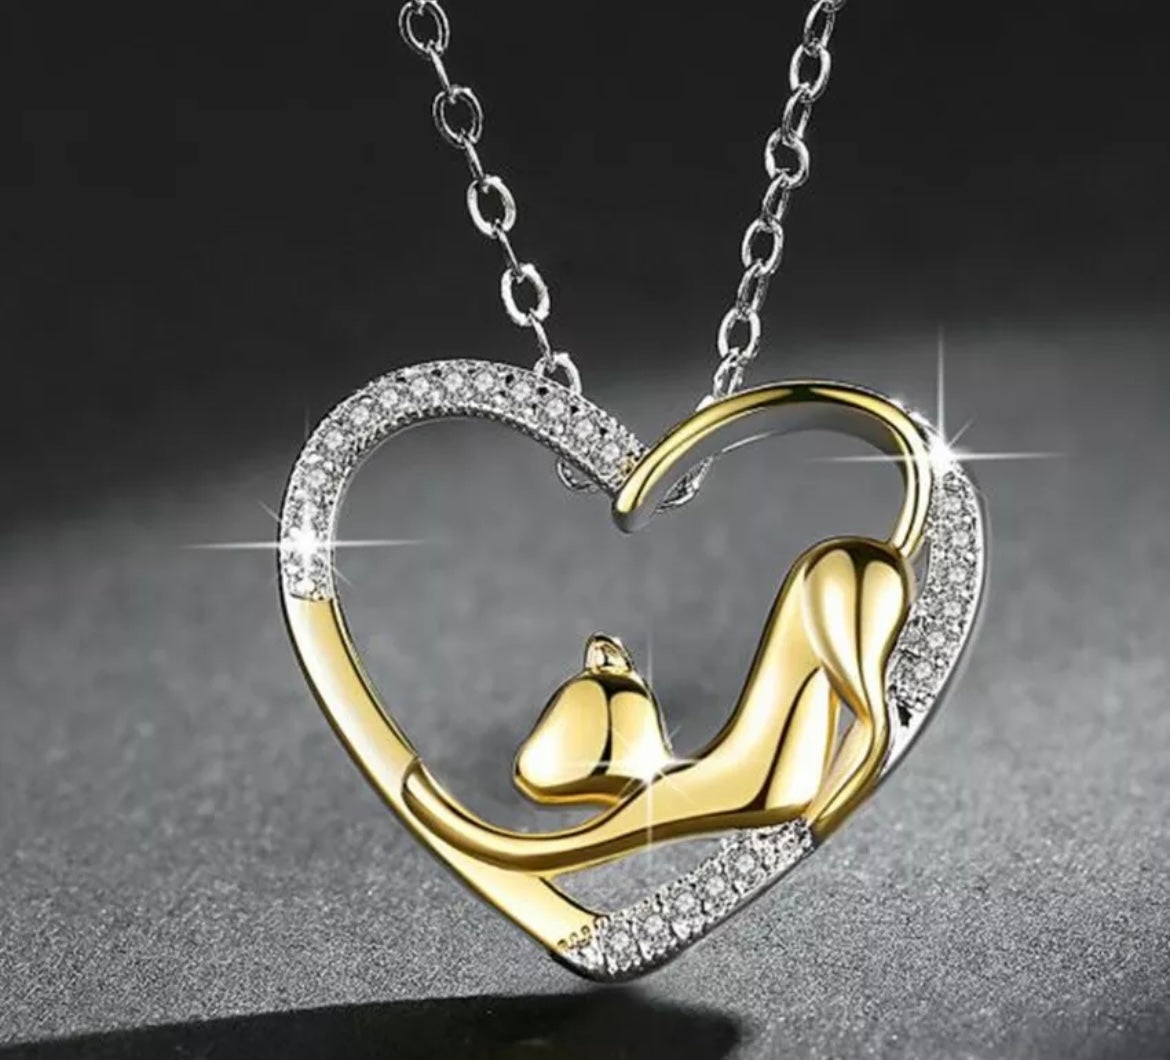 Silver & Gold Heart Cat Pendant Necklace